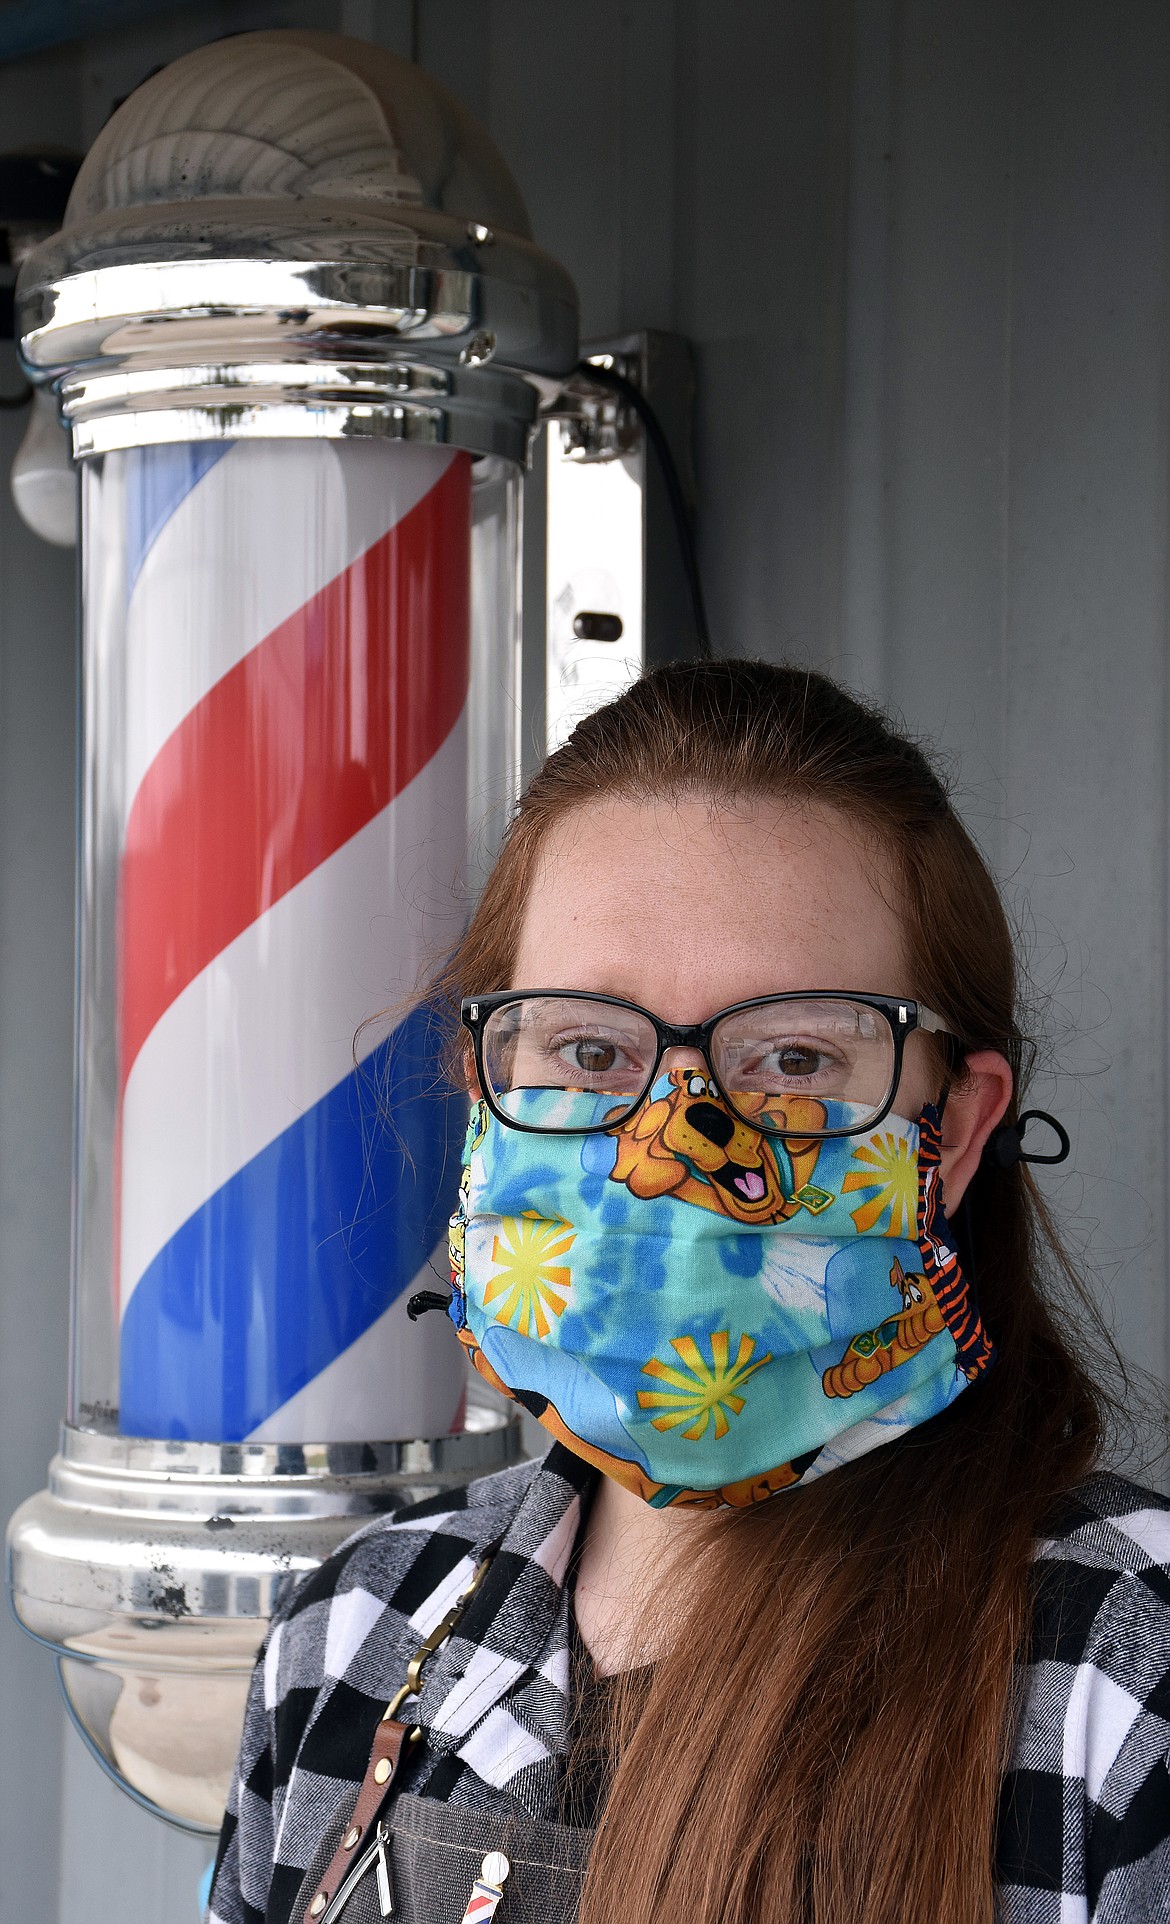 Allie Swan, owner of Allilocks Haircuts in Libby, expected challenges when she opened the barbershop last year, but not a pandemic. Swan reopened the shop for appointments only on Monday. (Duncan Adams/The Western News)